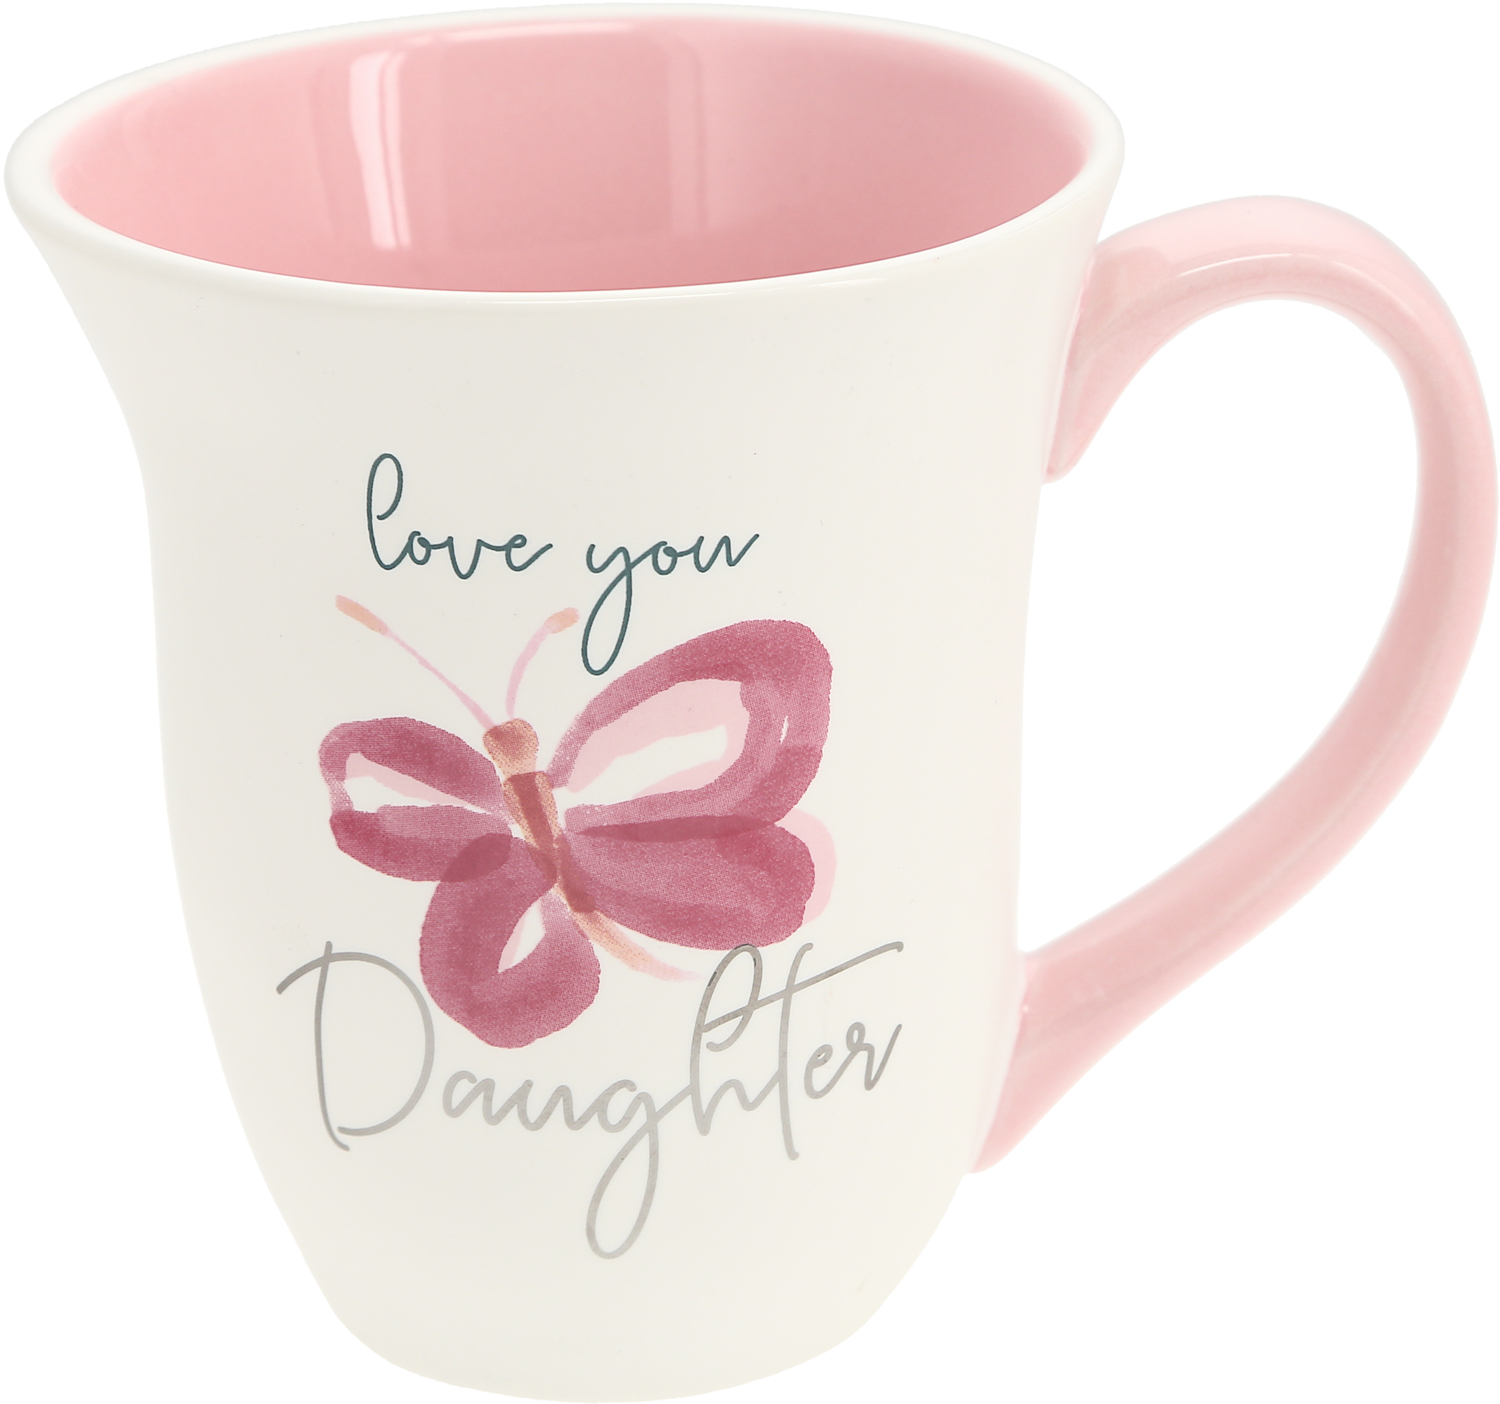 Daughter by Rosy Heart - Daughter - 16 oz Cup